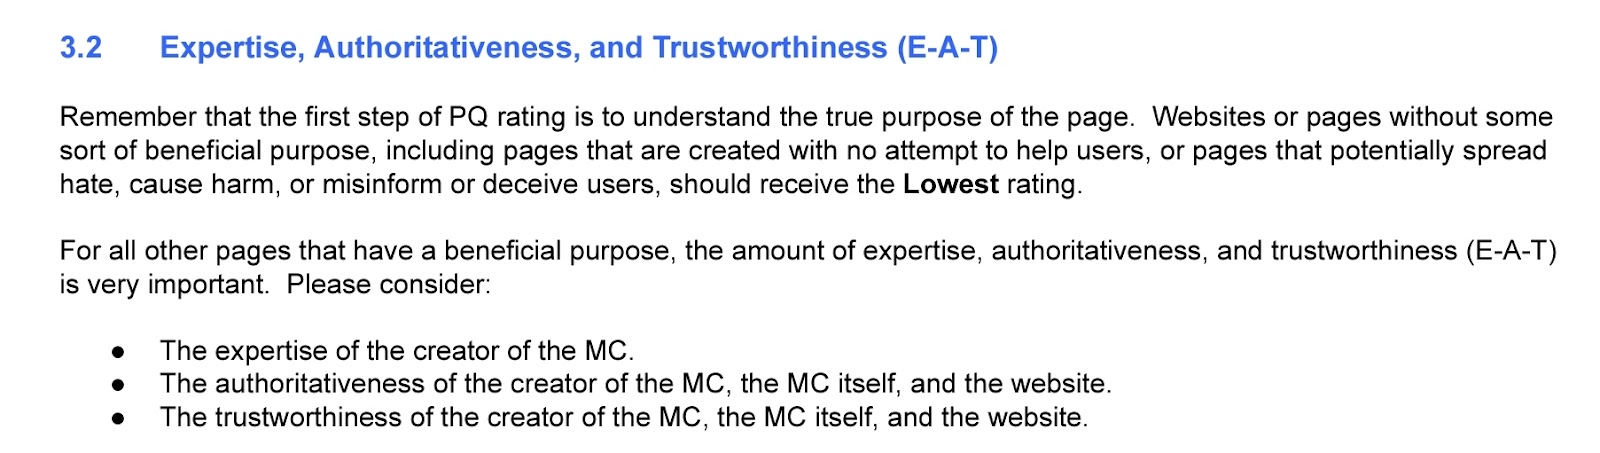 Google search quality evaluator guidelines on Expertise, Authoritativeness, and Trustworthiness